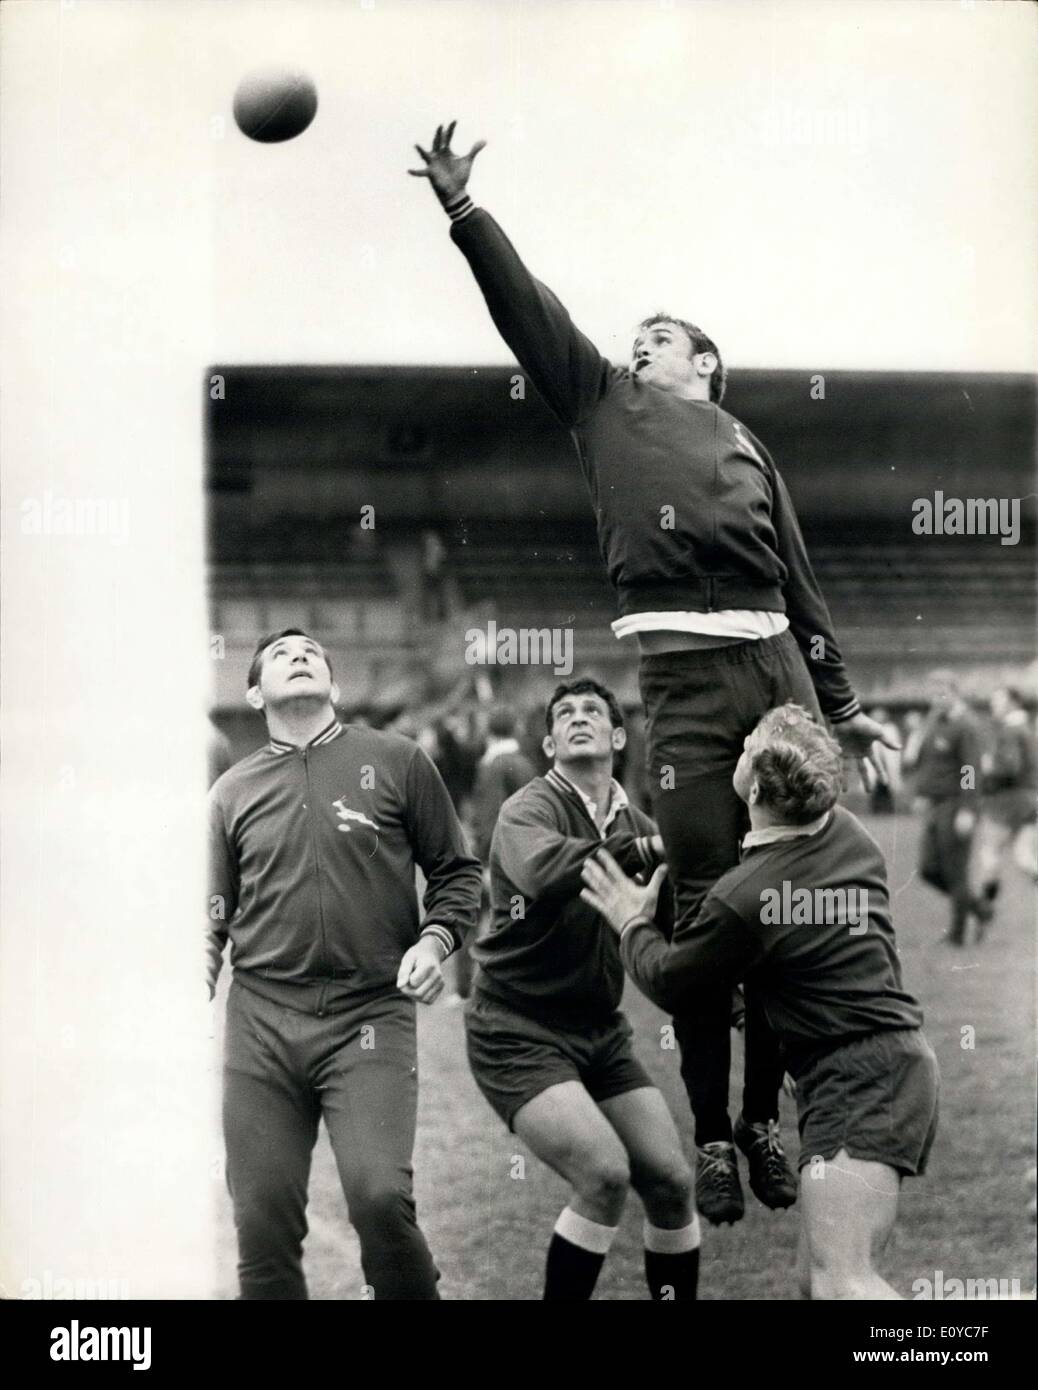 Oct. 31, 1969 - Springboks train at Richmond: The South African rugby touring team were training today at Old Deer Park, Richmond . Photo shows some of the South African players practicing a line out during training today. Stock Photo